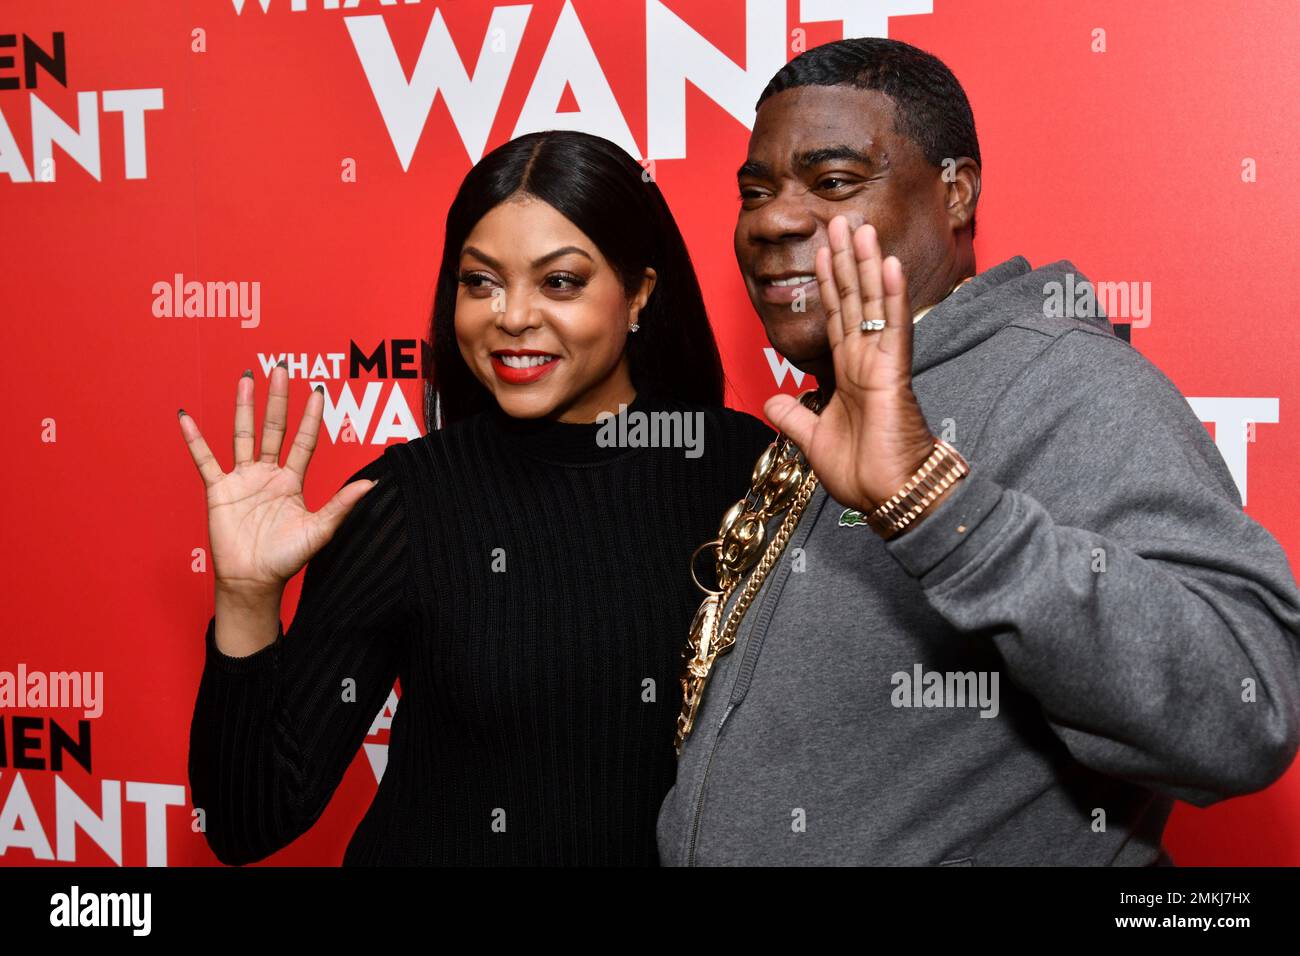 https://c8.alamy.com/comp/2MKJ7HX/taraji-p-henson-and-tracy-morgan-attend-a-screening-of-what-men-want-at-the-crosby-street-hotel-on-monday-feb-4-2019-in-new-york-photo-by-charles-sykesinvisionap-2MKJ7HX.jpg